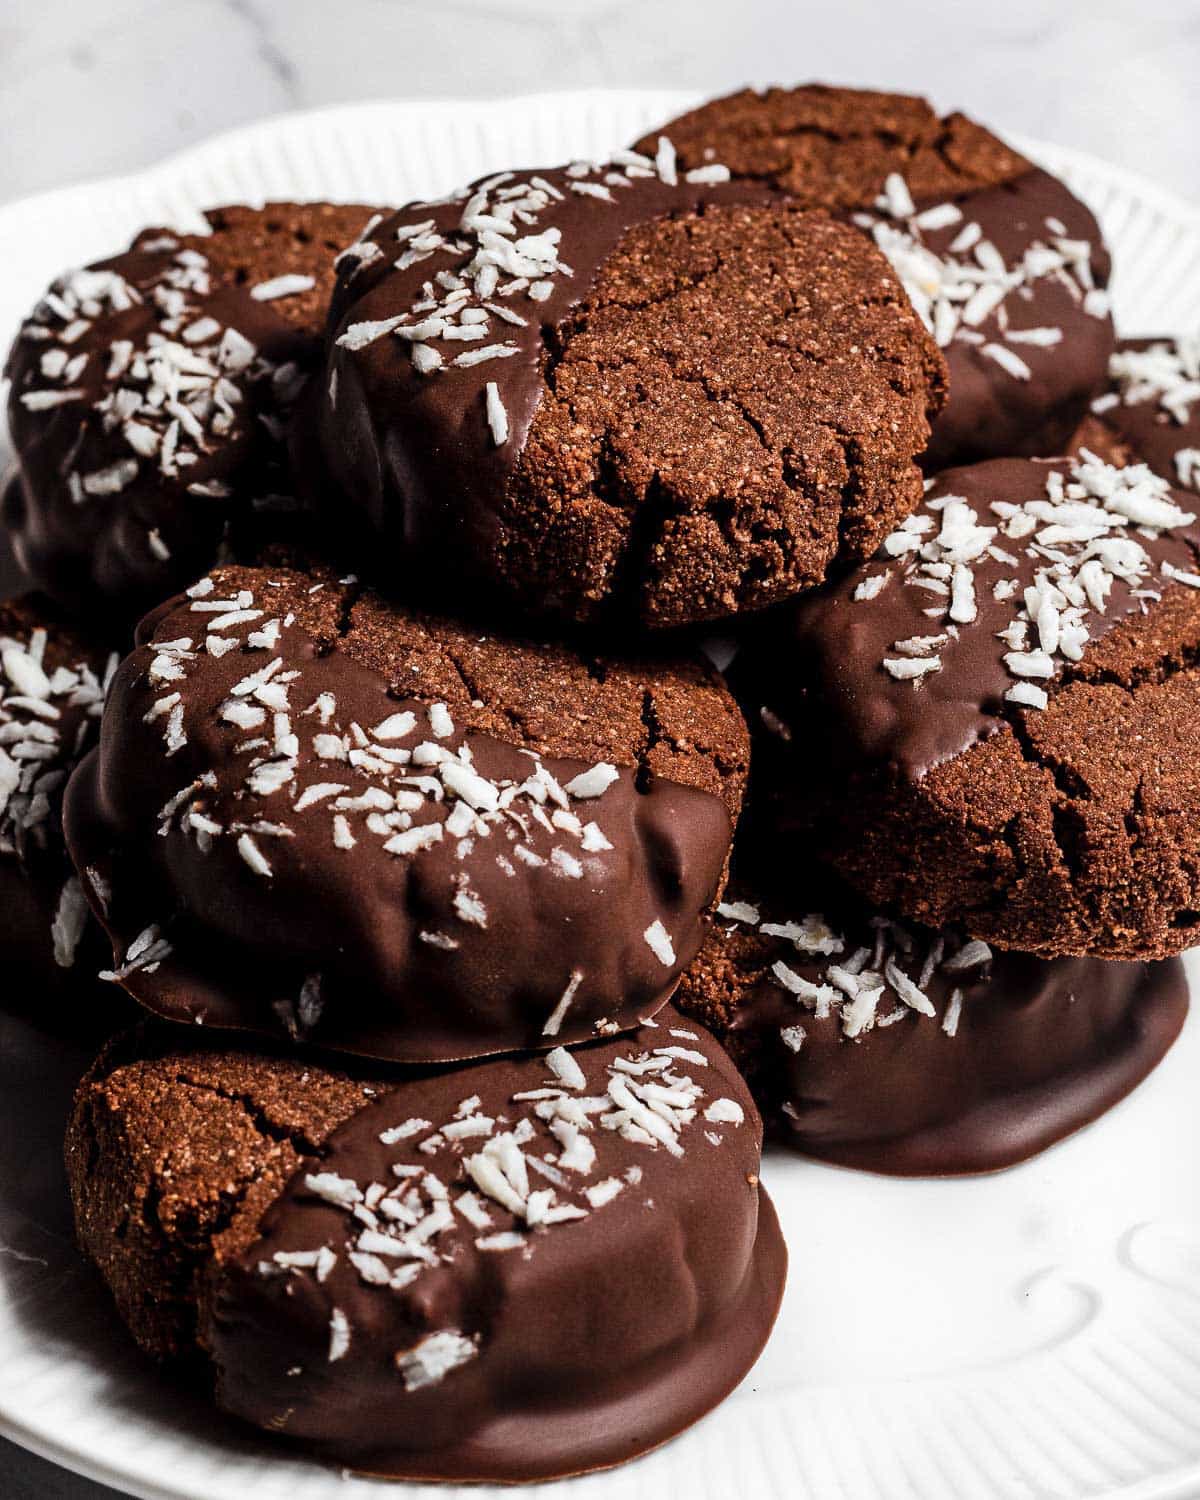 A pile of chocolate coconut biscuits on a white plate.